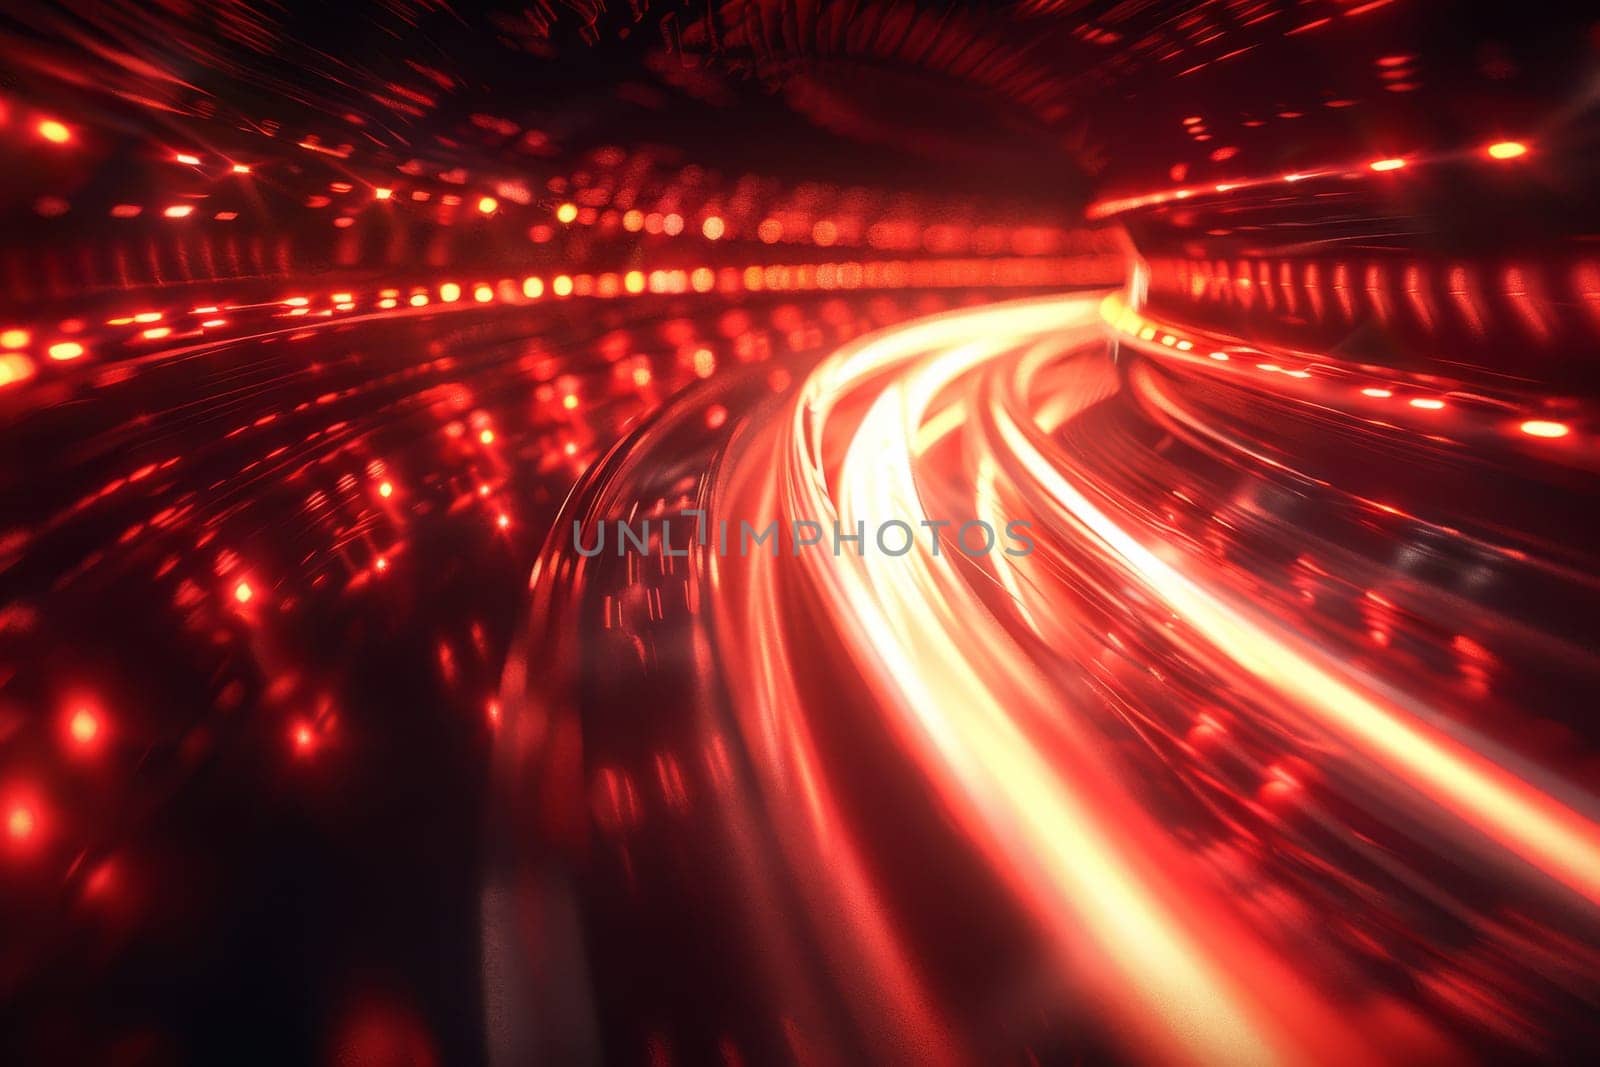 A red tunnel with a bright light shining through it. The tunnel is filled with many lights, creating a sense of movement and energy